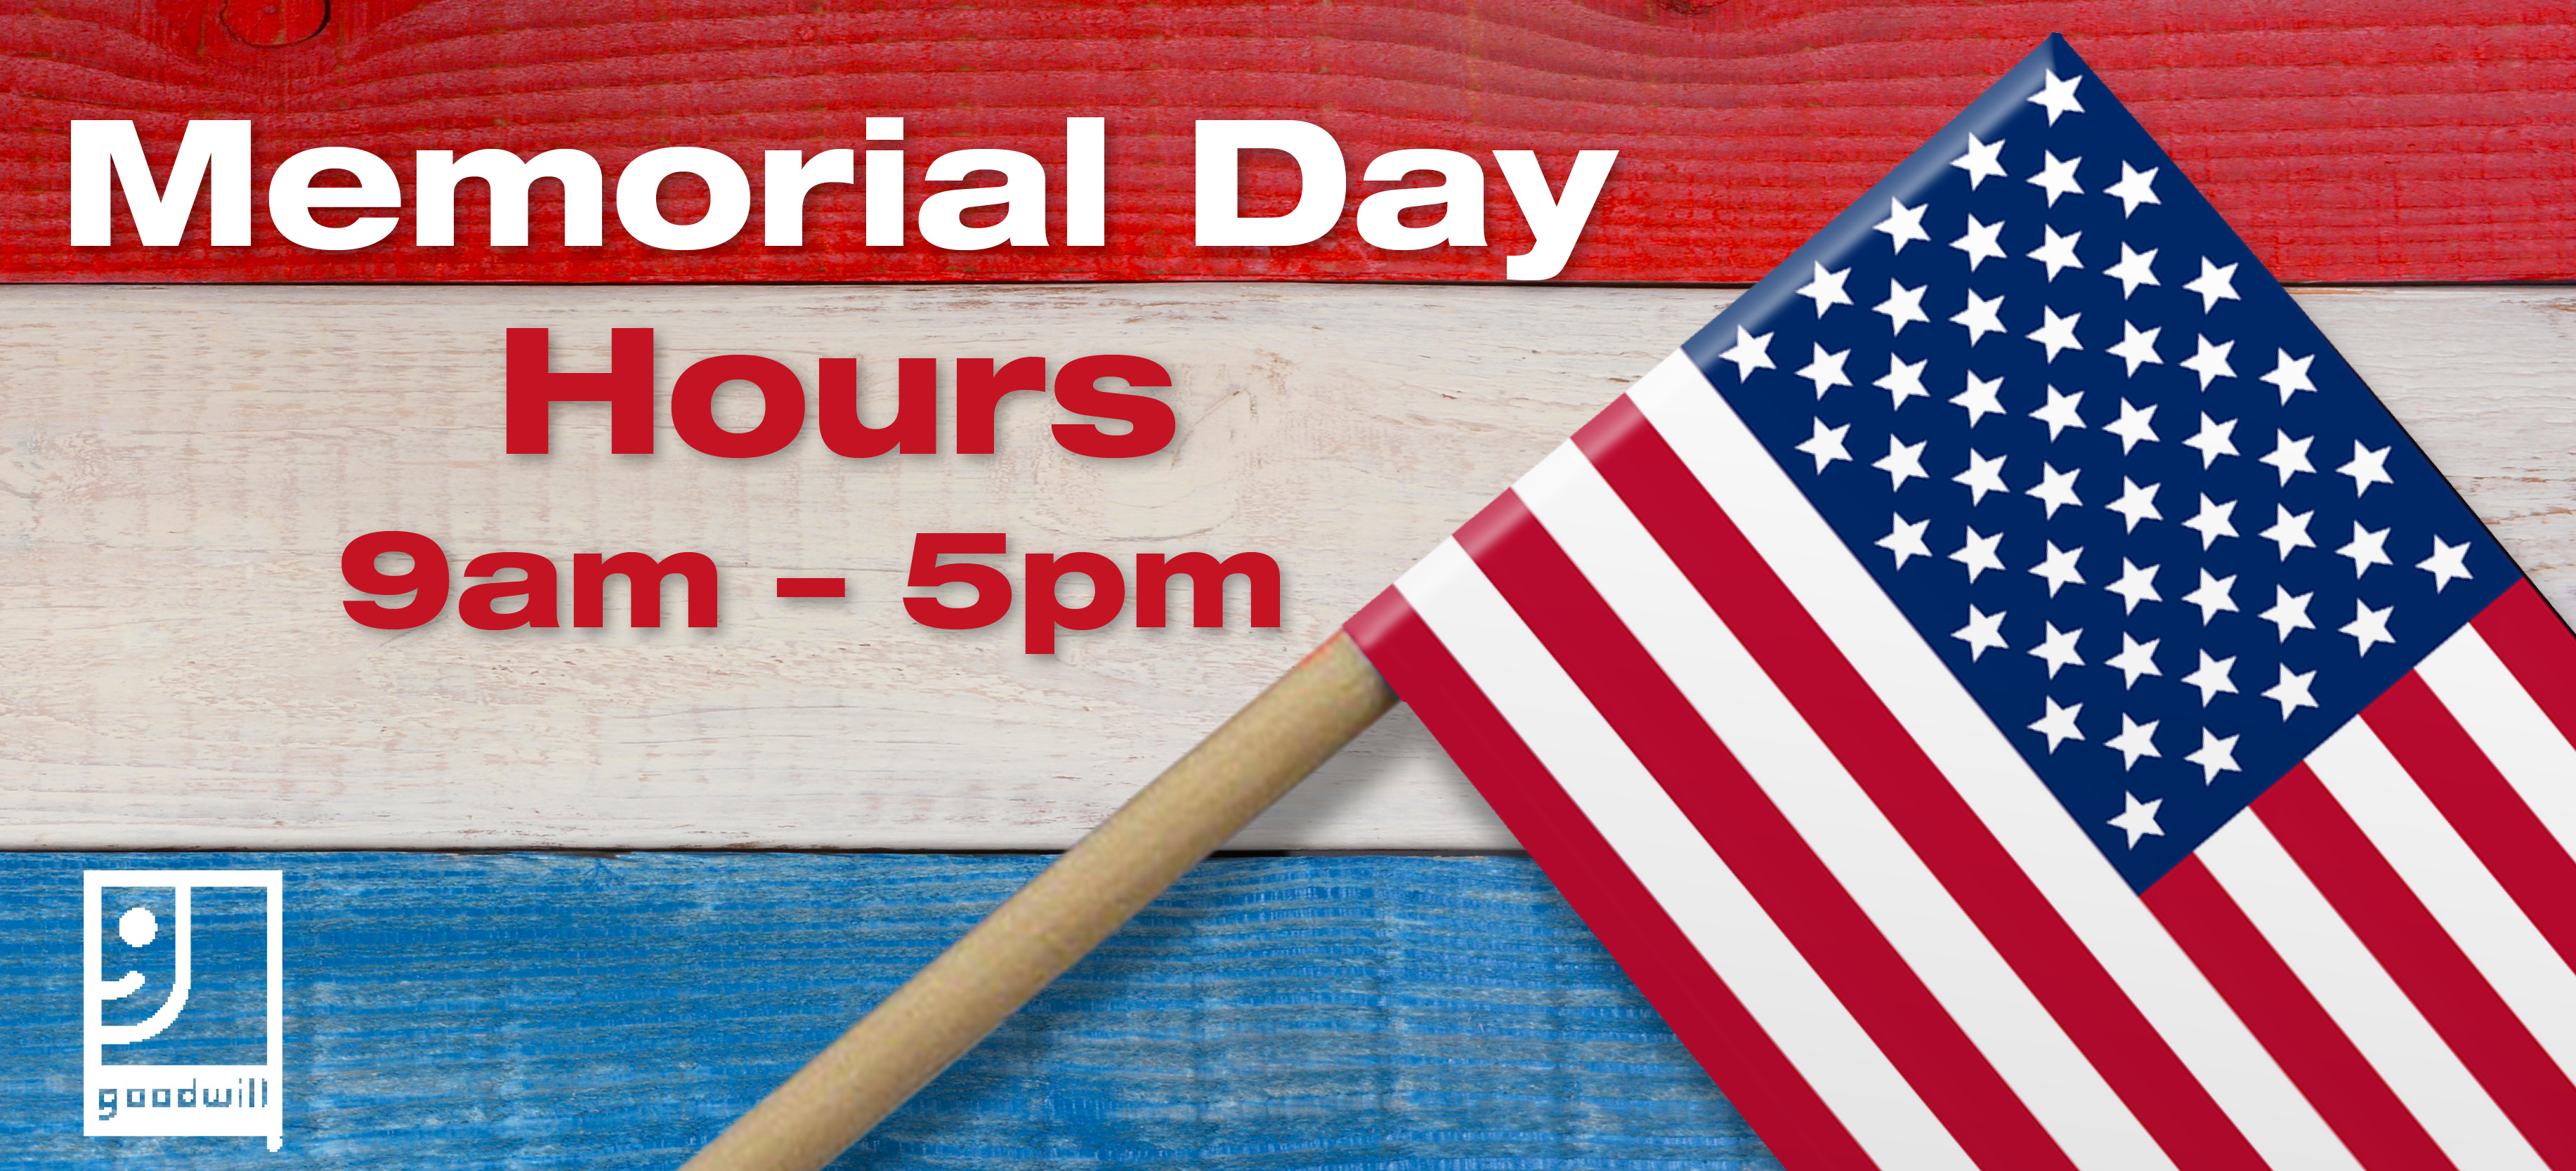 Goodwill Memorial Day Hours Goodwill Keystone Area